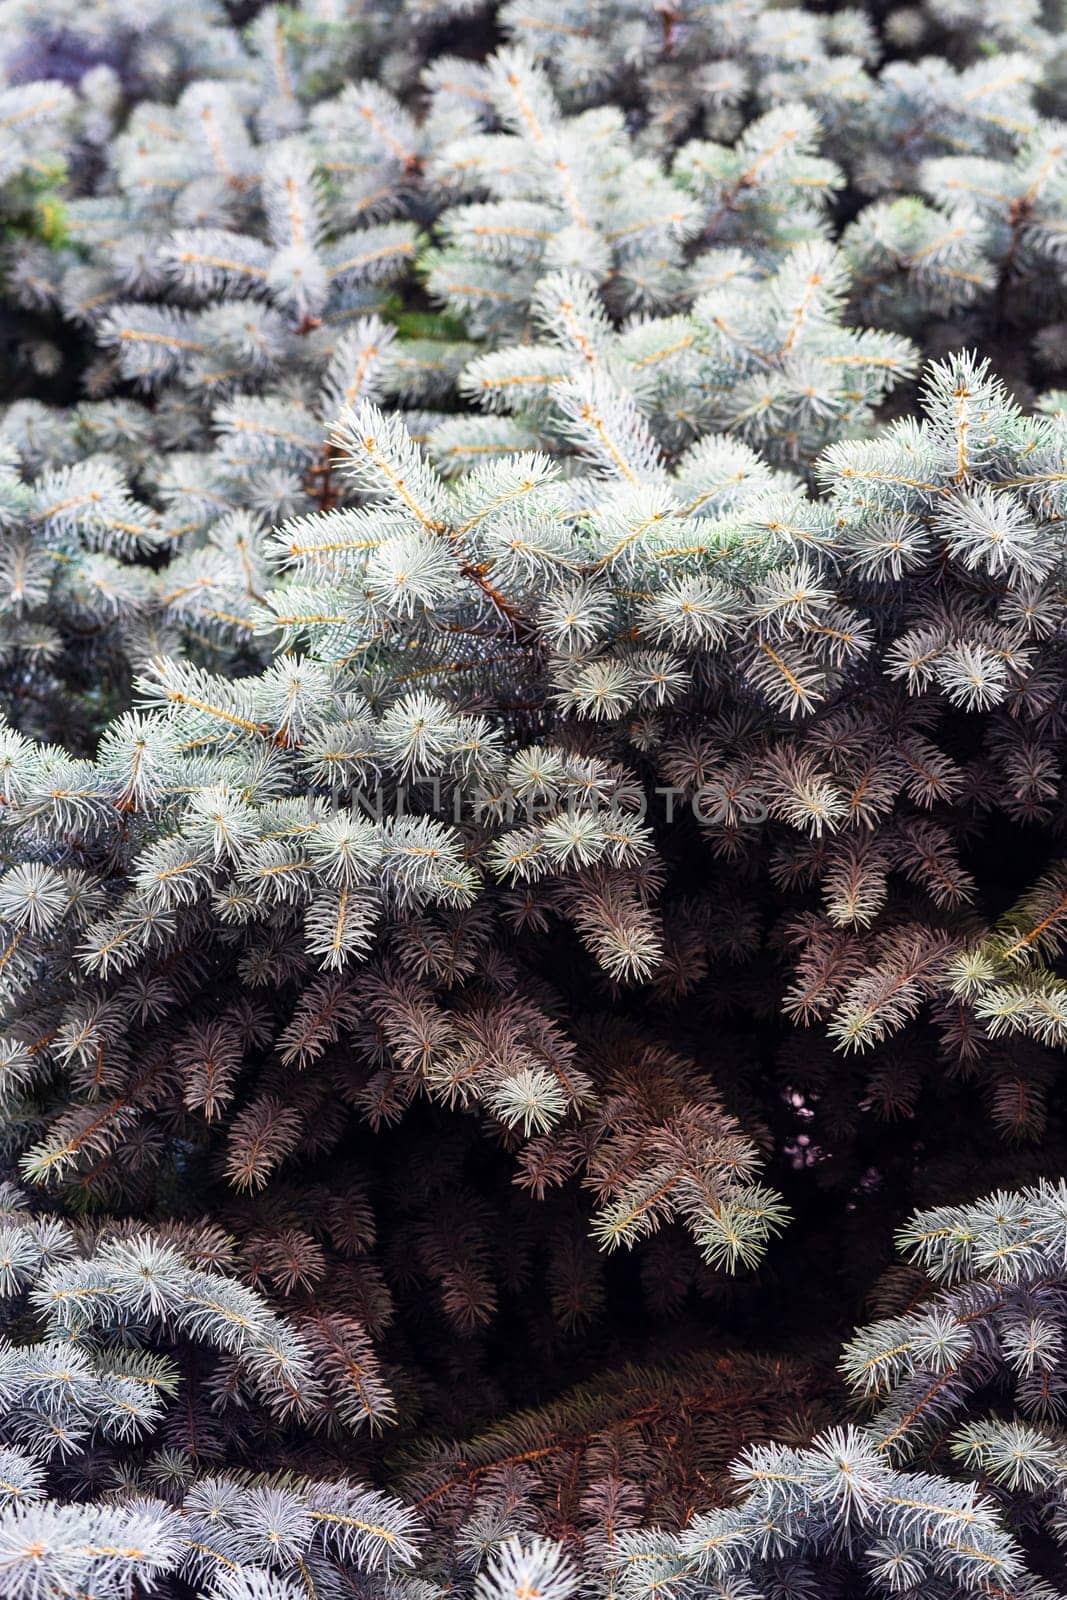 Silver pine tree, silver spruce pine, fir tree brunches closeup photo